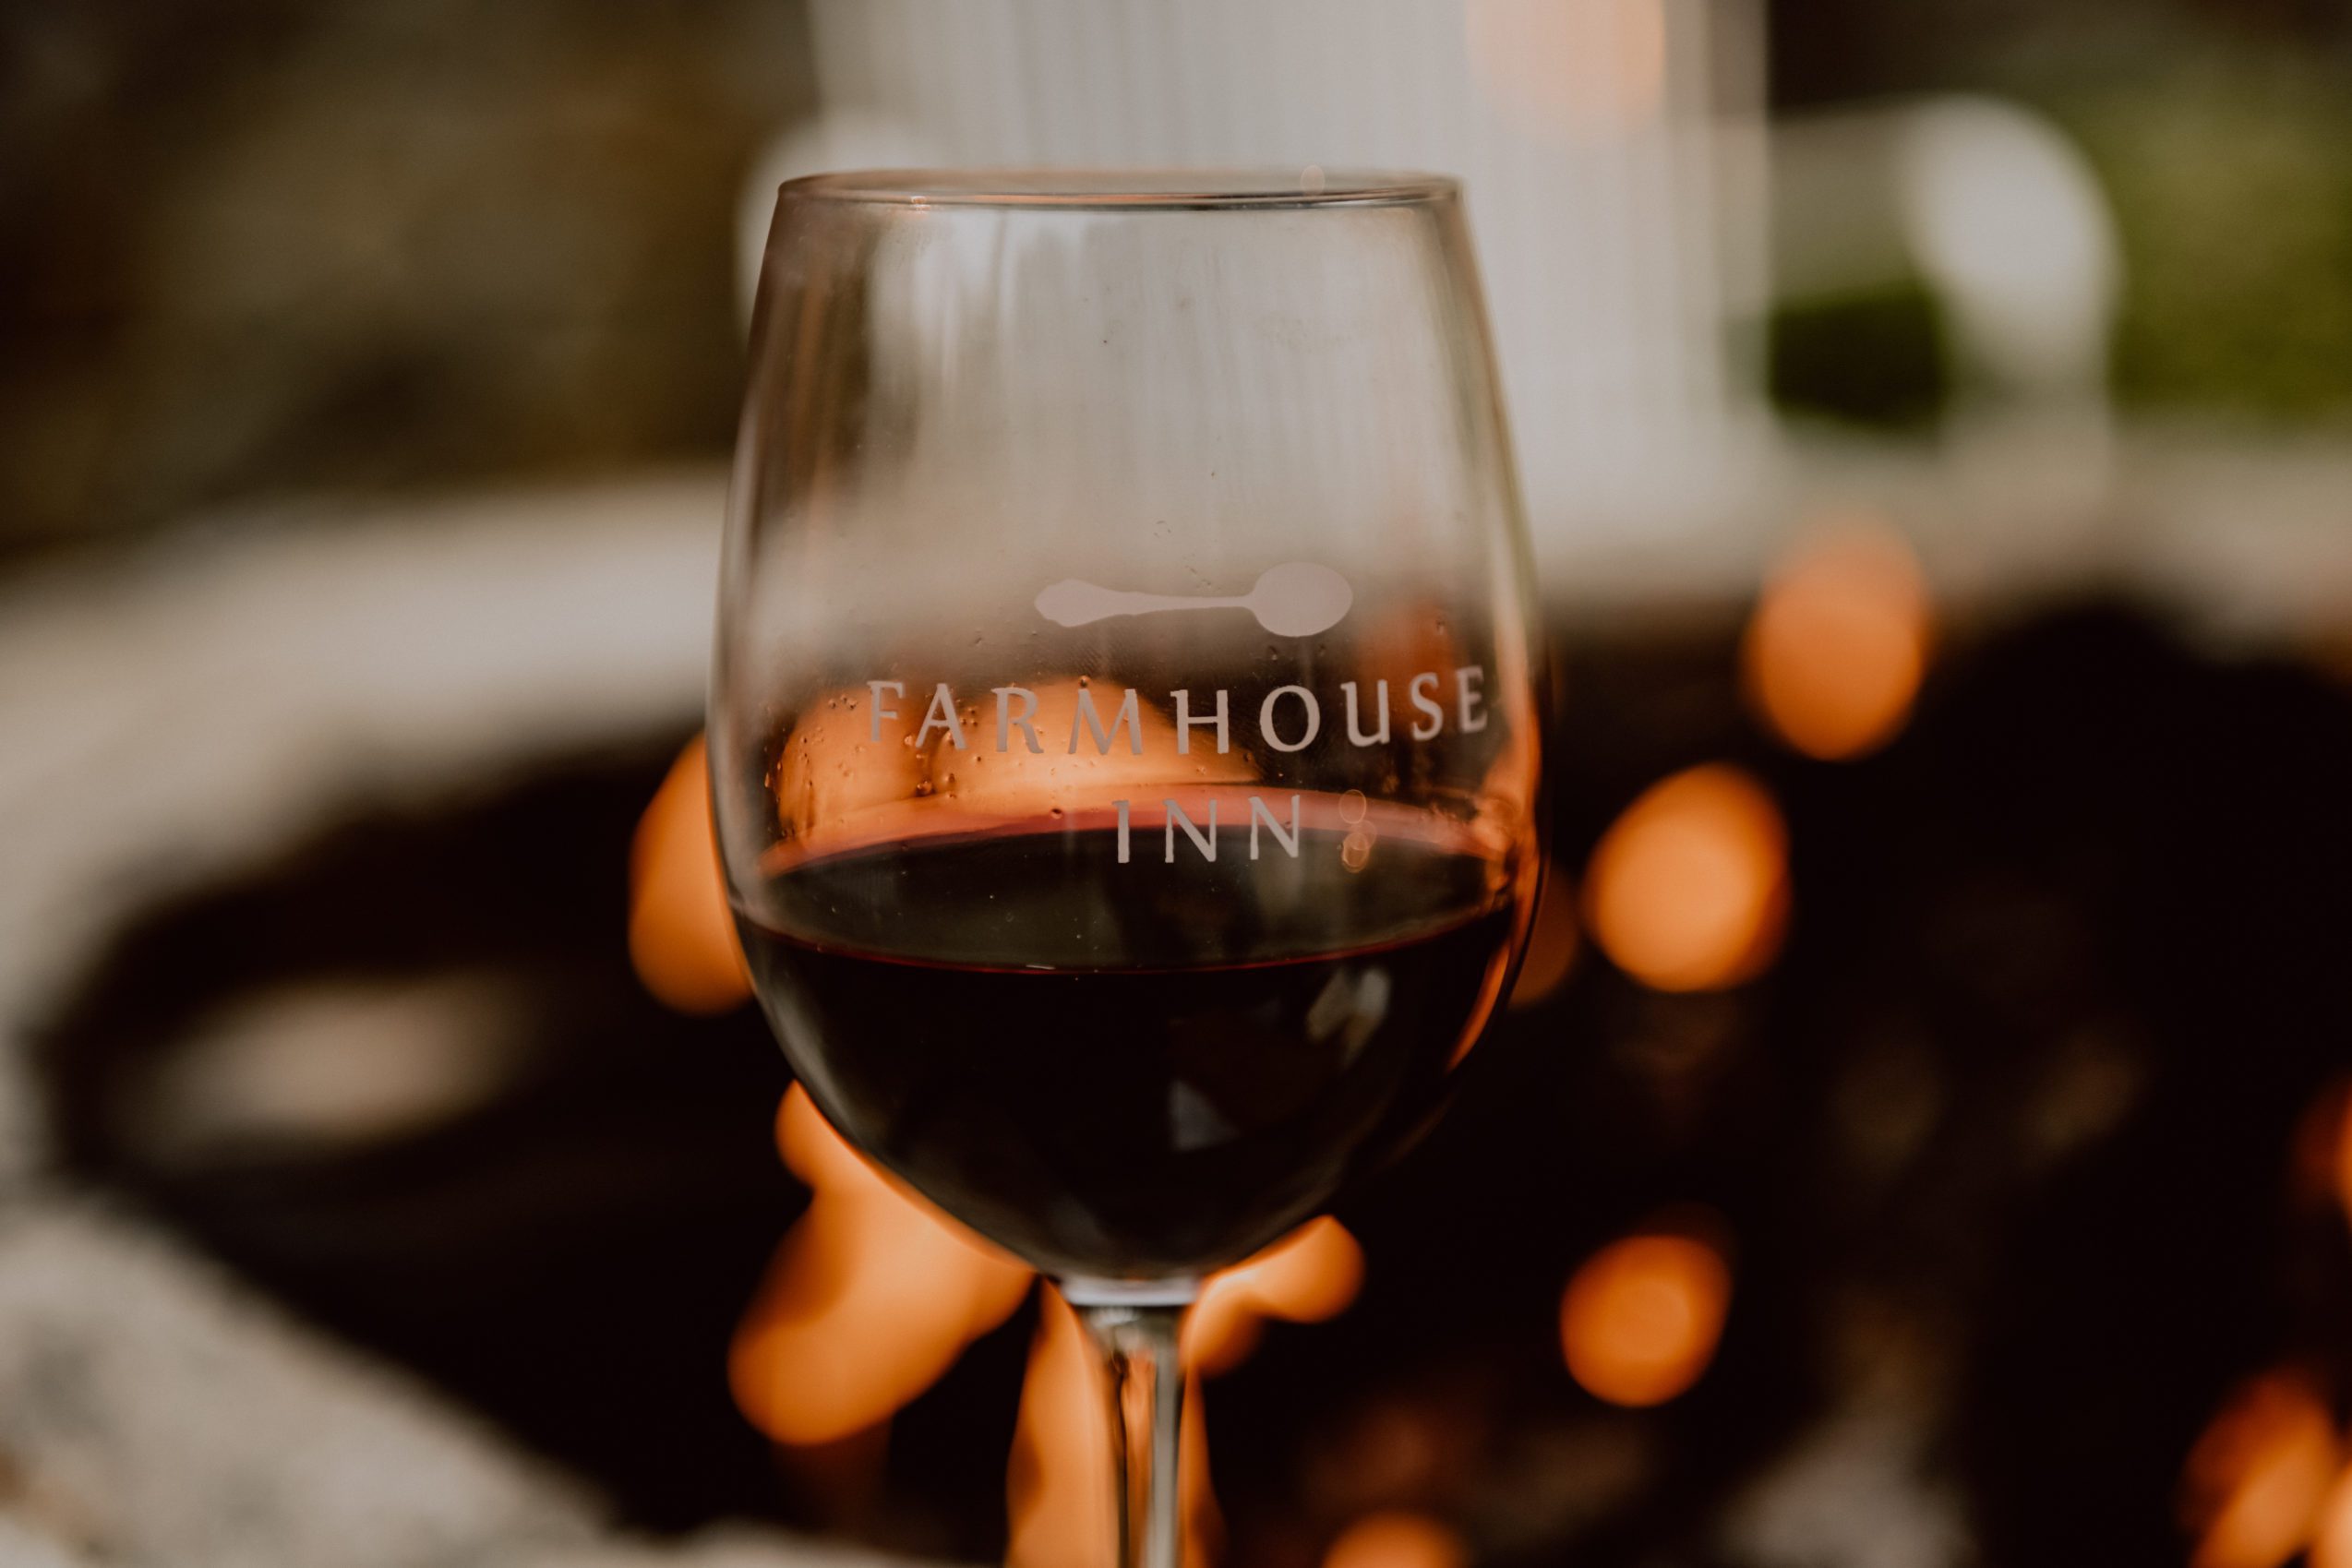 Farmhouse Inn branded wine glass with red wine in front of fire